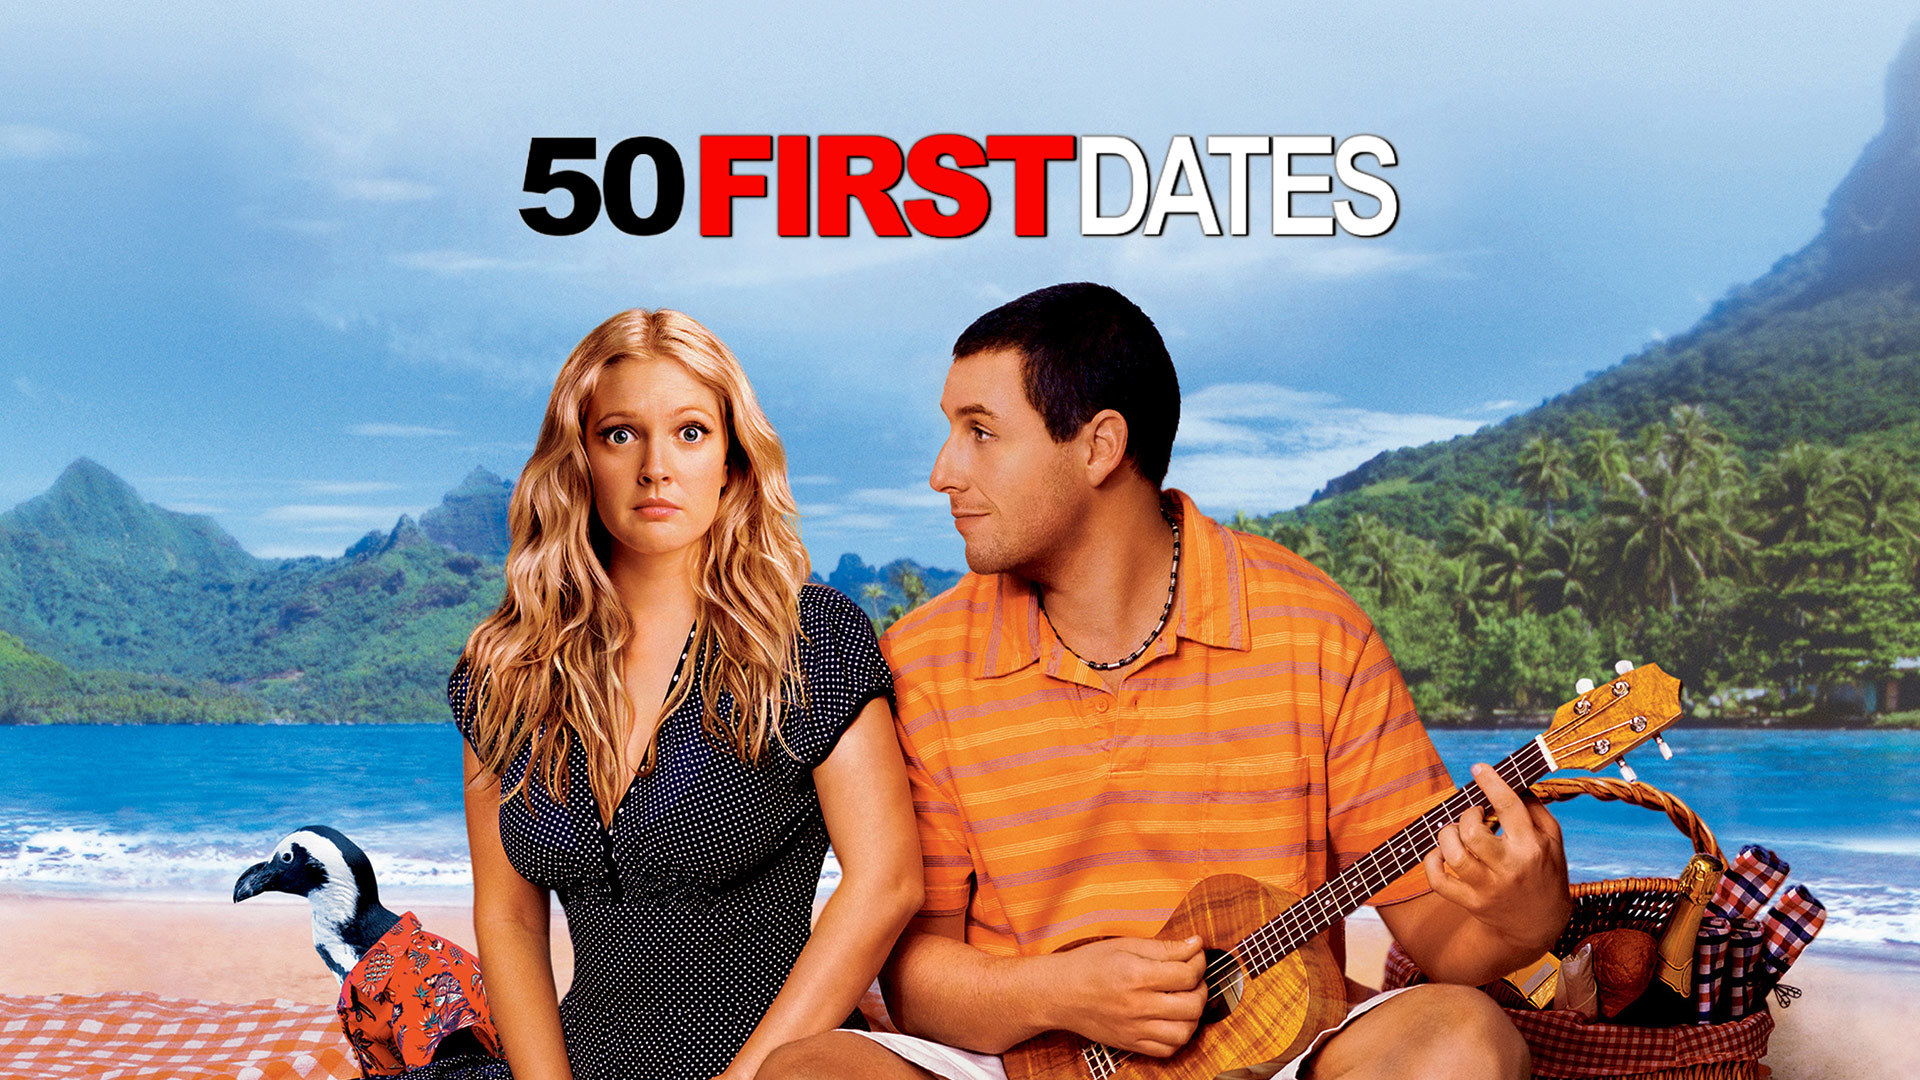 dating after 50 first dates meme